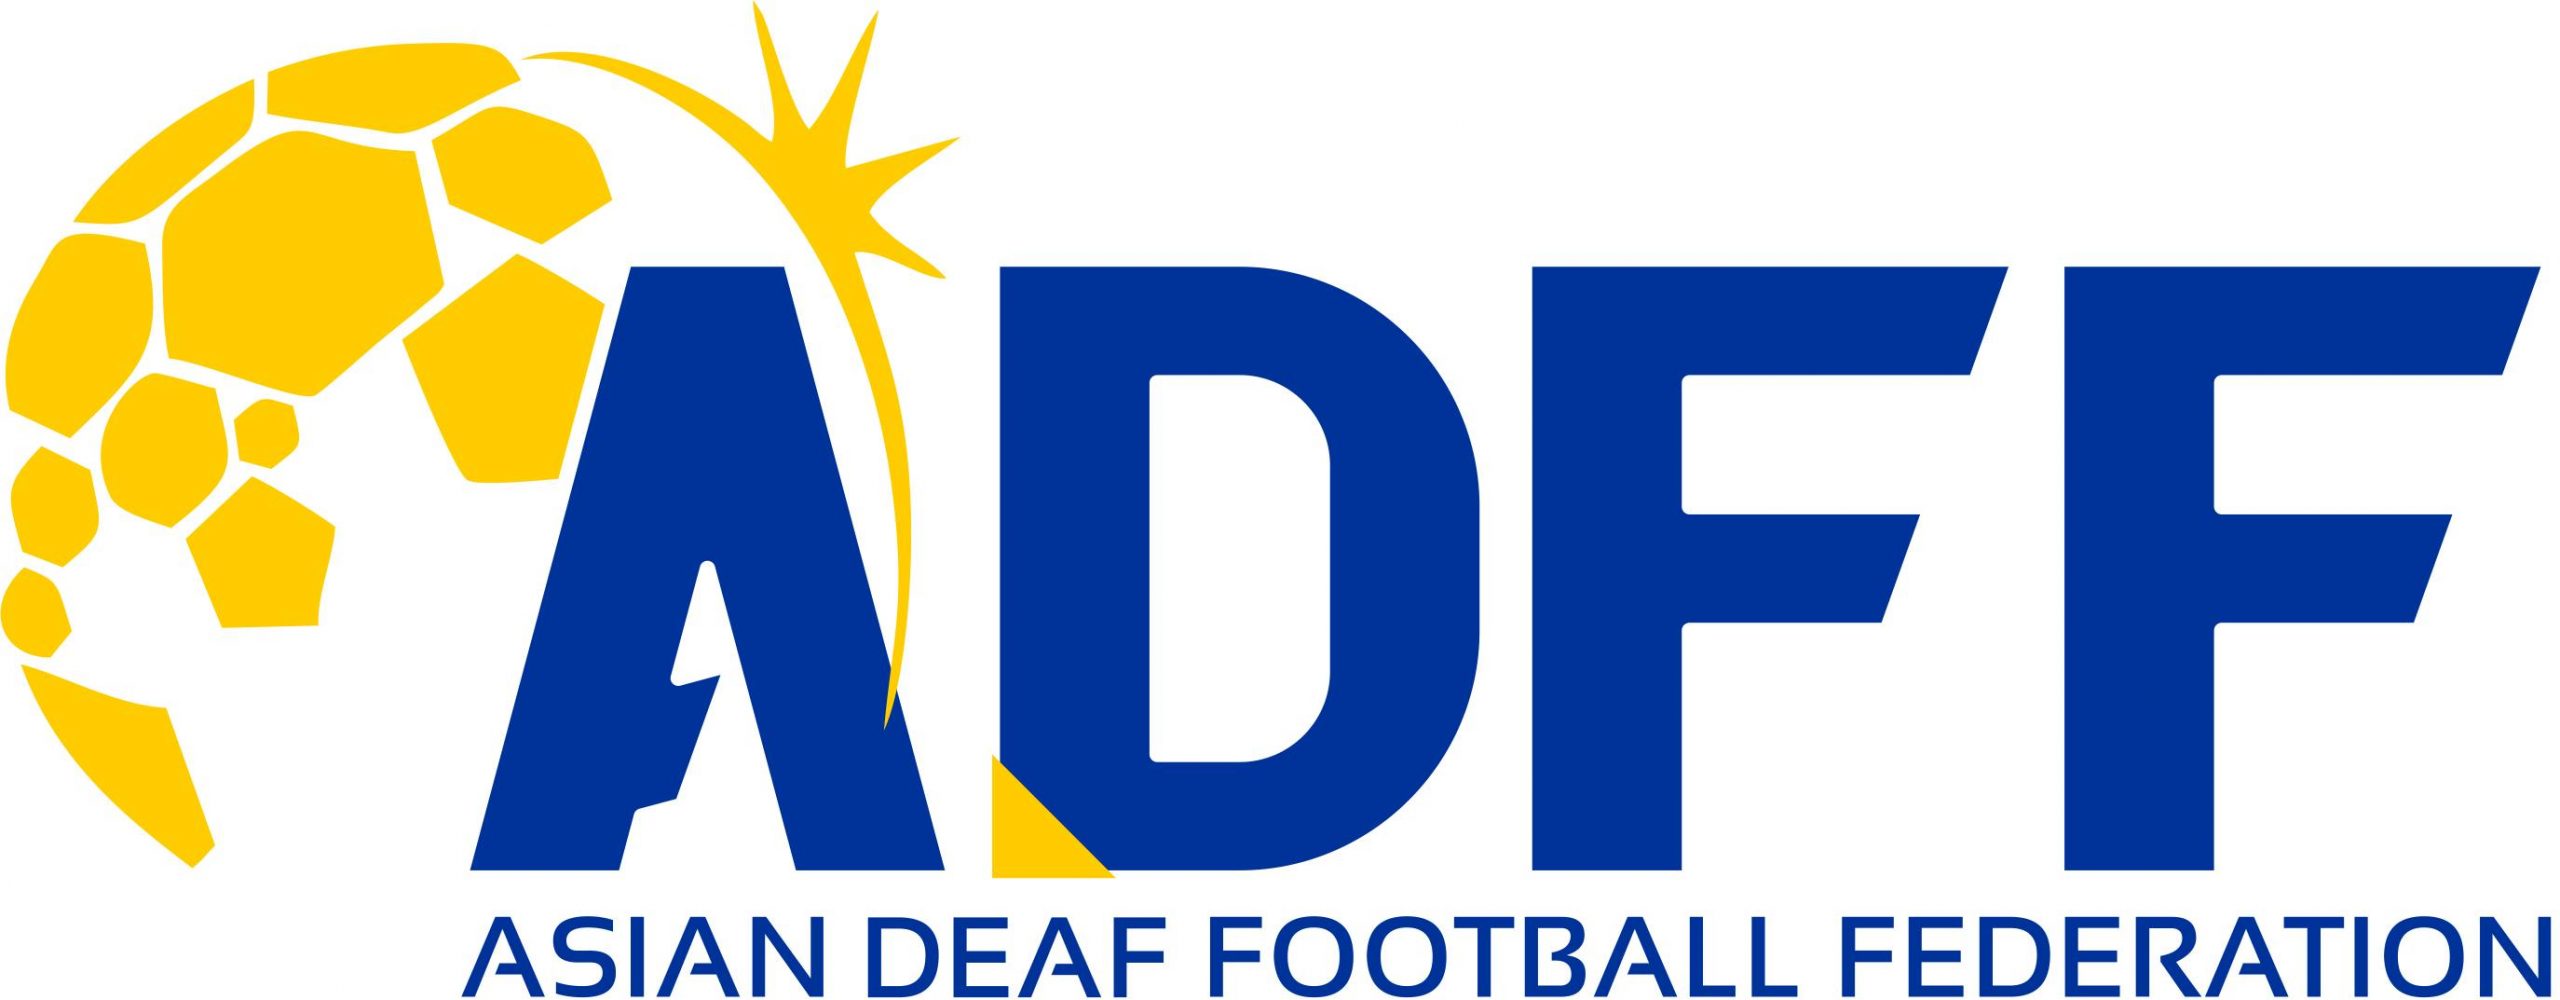 Good news!  The Legal Association of the ASIAN Deaf Football Federation (ADFF), registered in South Korea, has applied to the International Deaf Football…